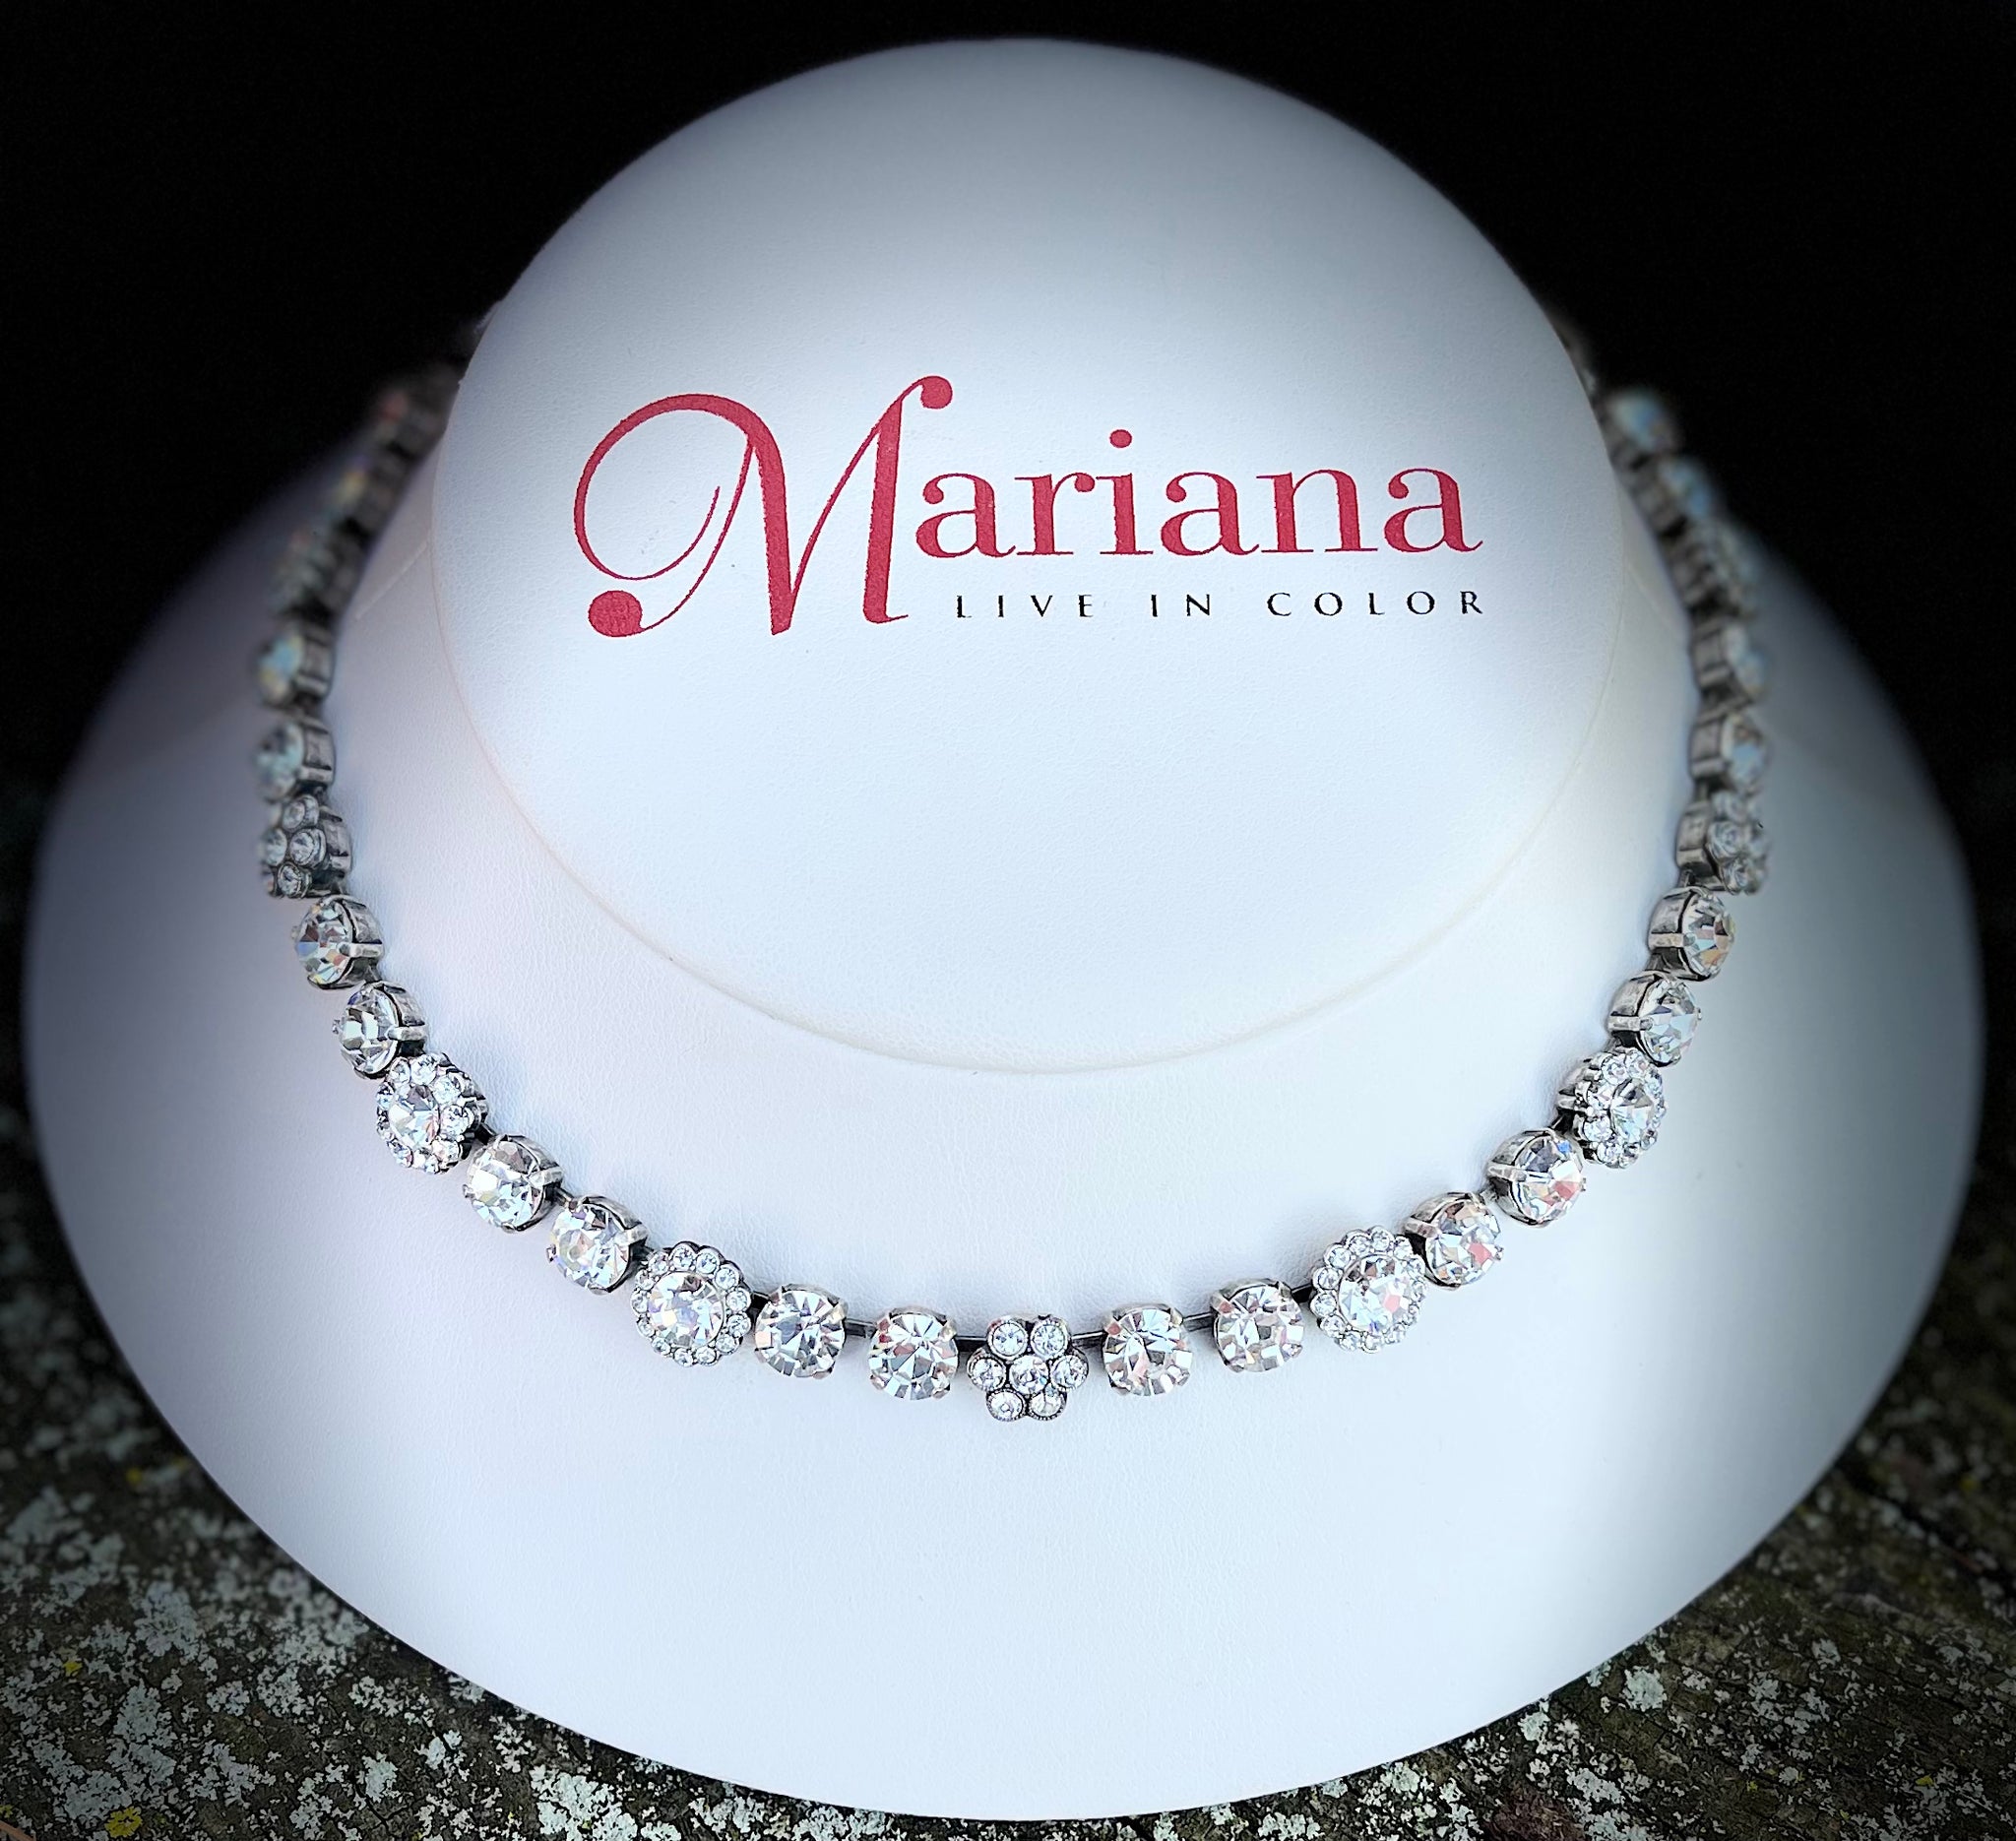 Mariana 3173 Must-Have Rosette Necklace "On A Clear Day" Silver Plated